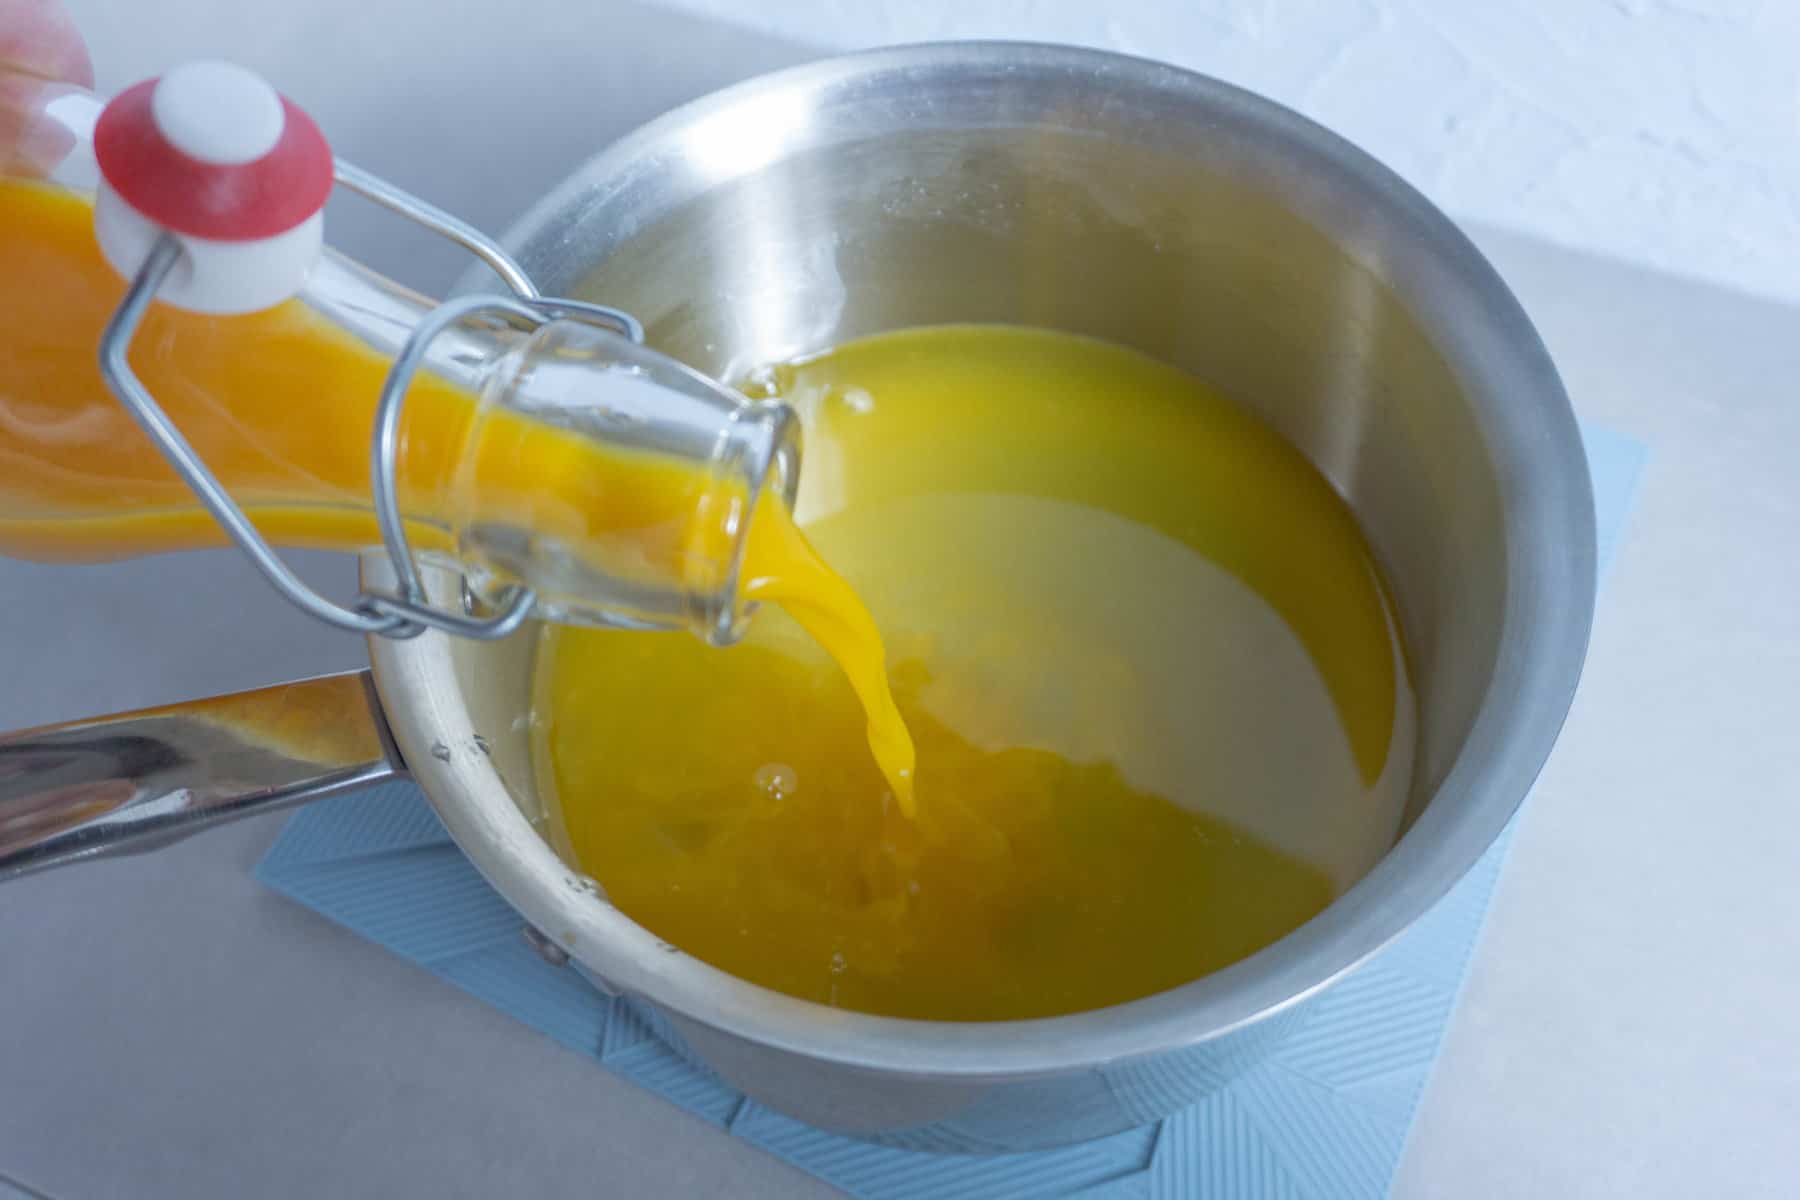 pouring passion fruit juice into a sugar-water simple syrup mixture